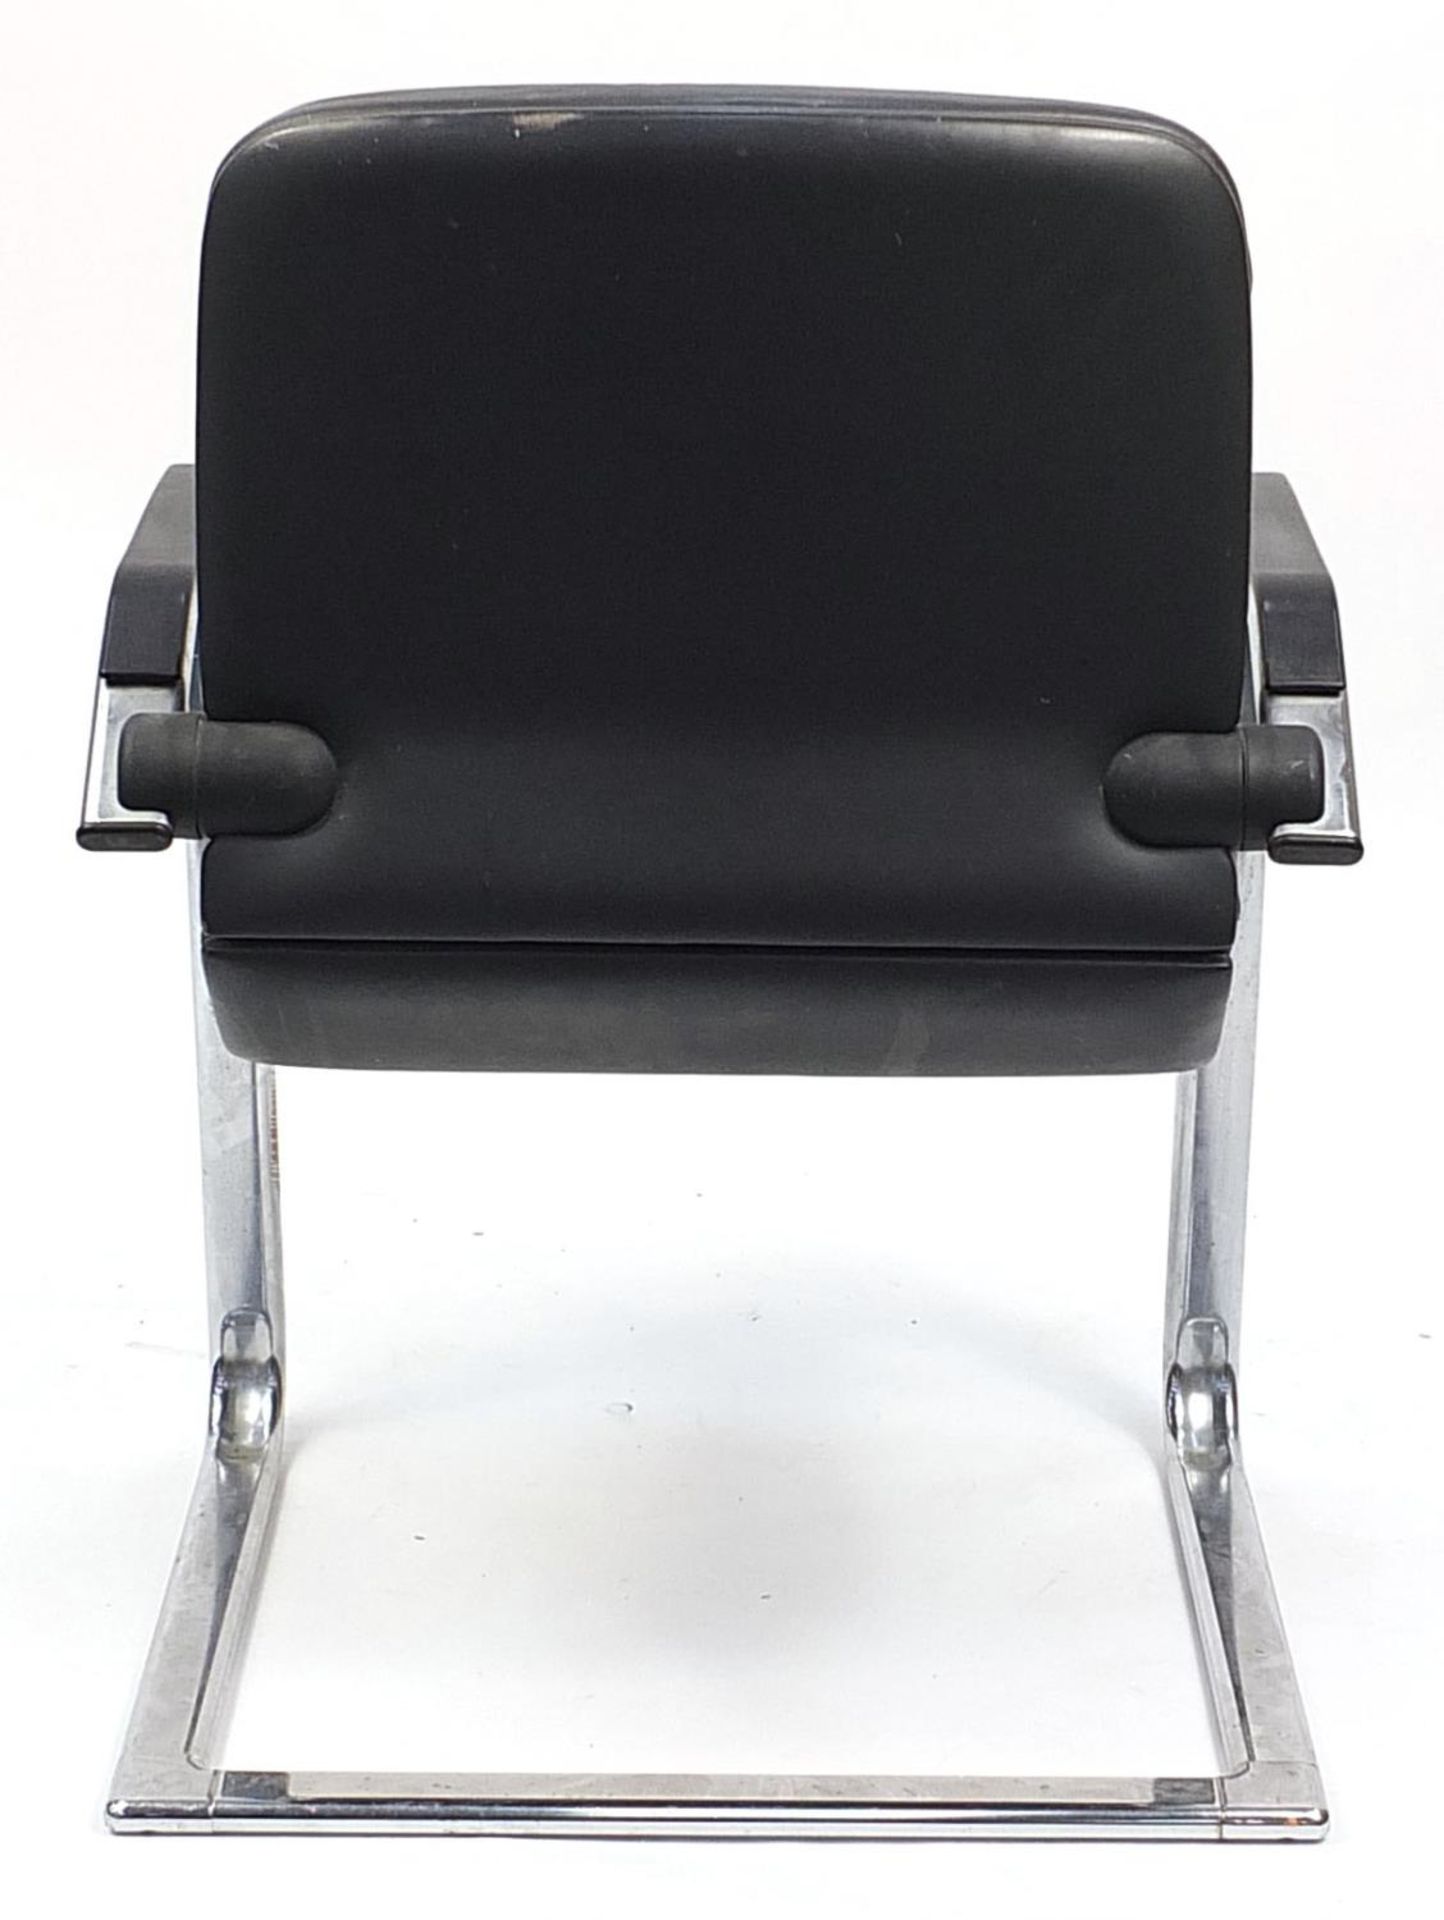 Ahren de Cirkel, Danish black leather and chrome recliner office chair, label to the base, - Image 3 of 4